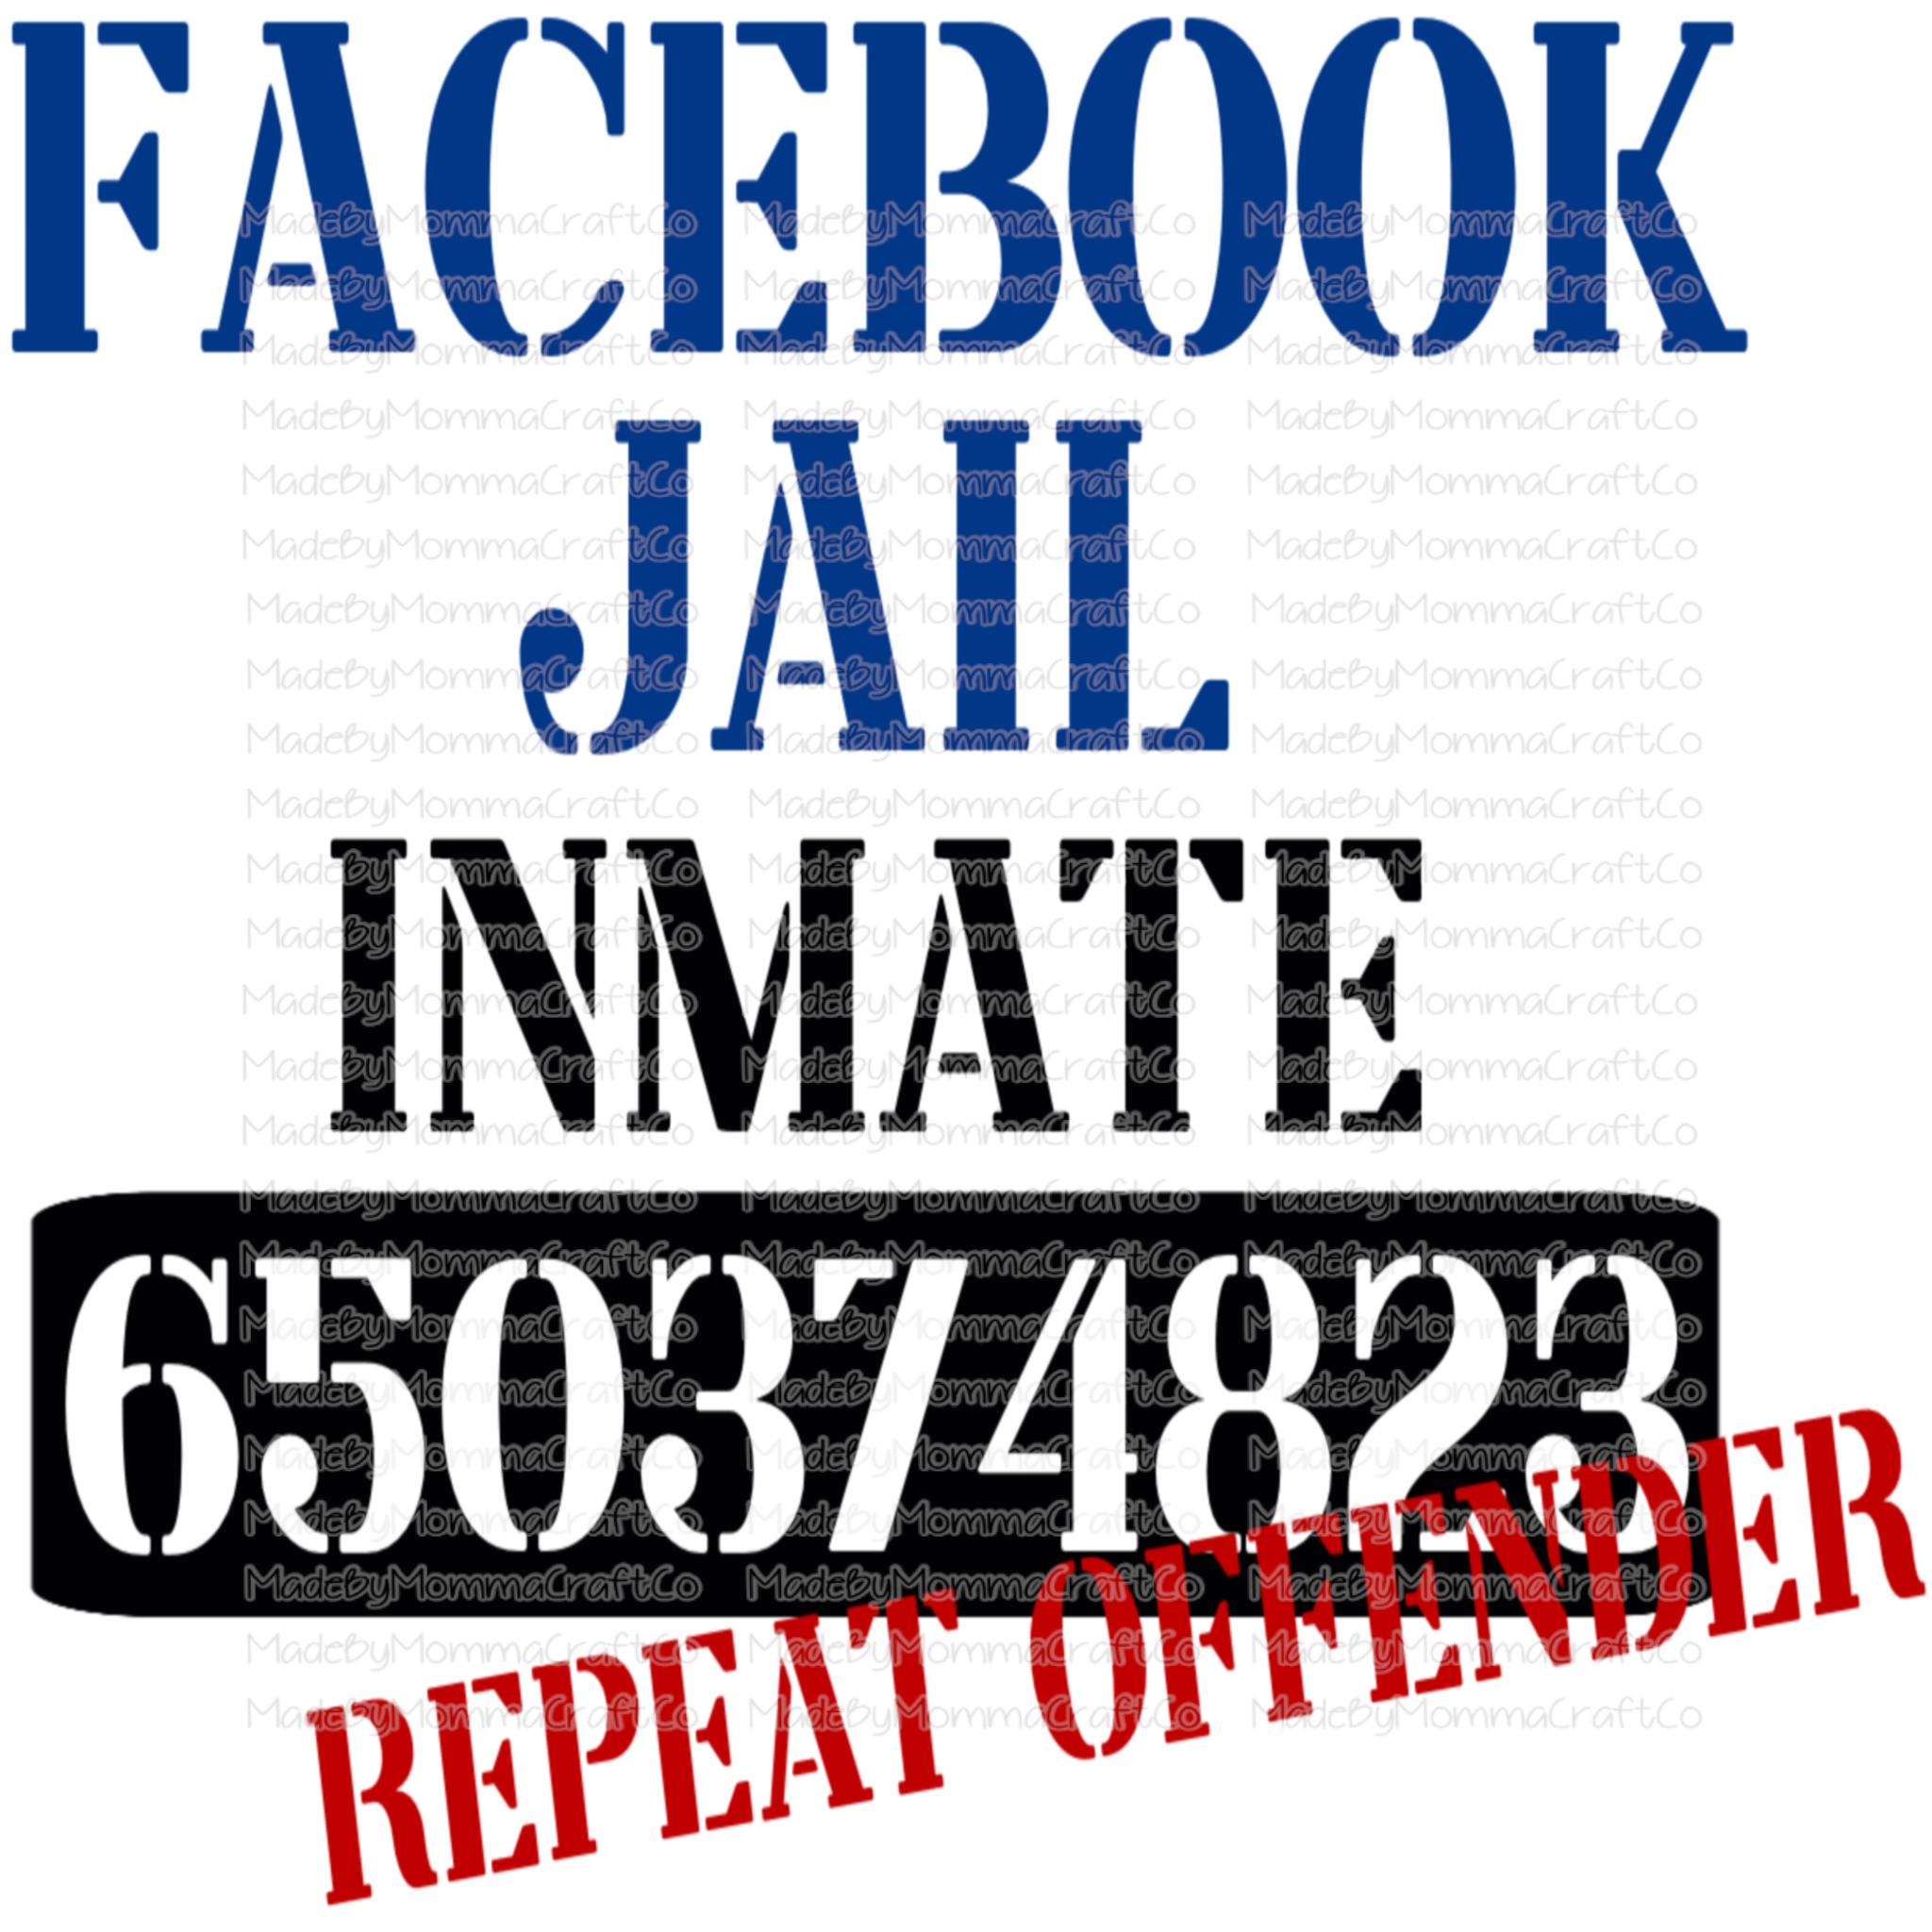 the-official-online-store-of-facebook-jail-repeat-offender-cheat-clear-waterslide-or-cheat-clear-sticker-decal-or-digital-download-fashion_0.png